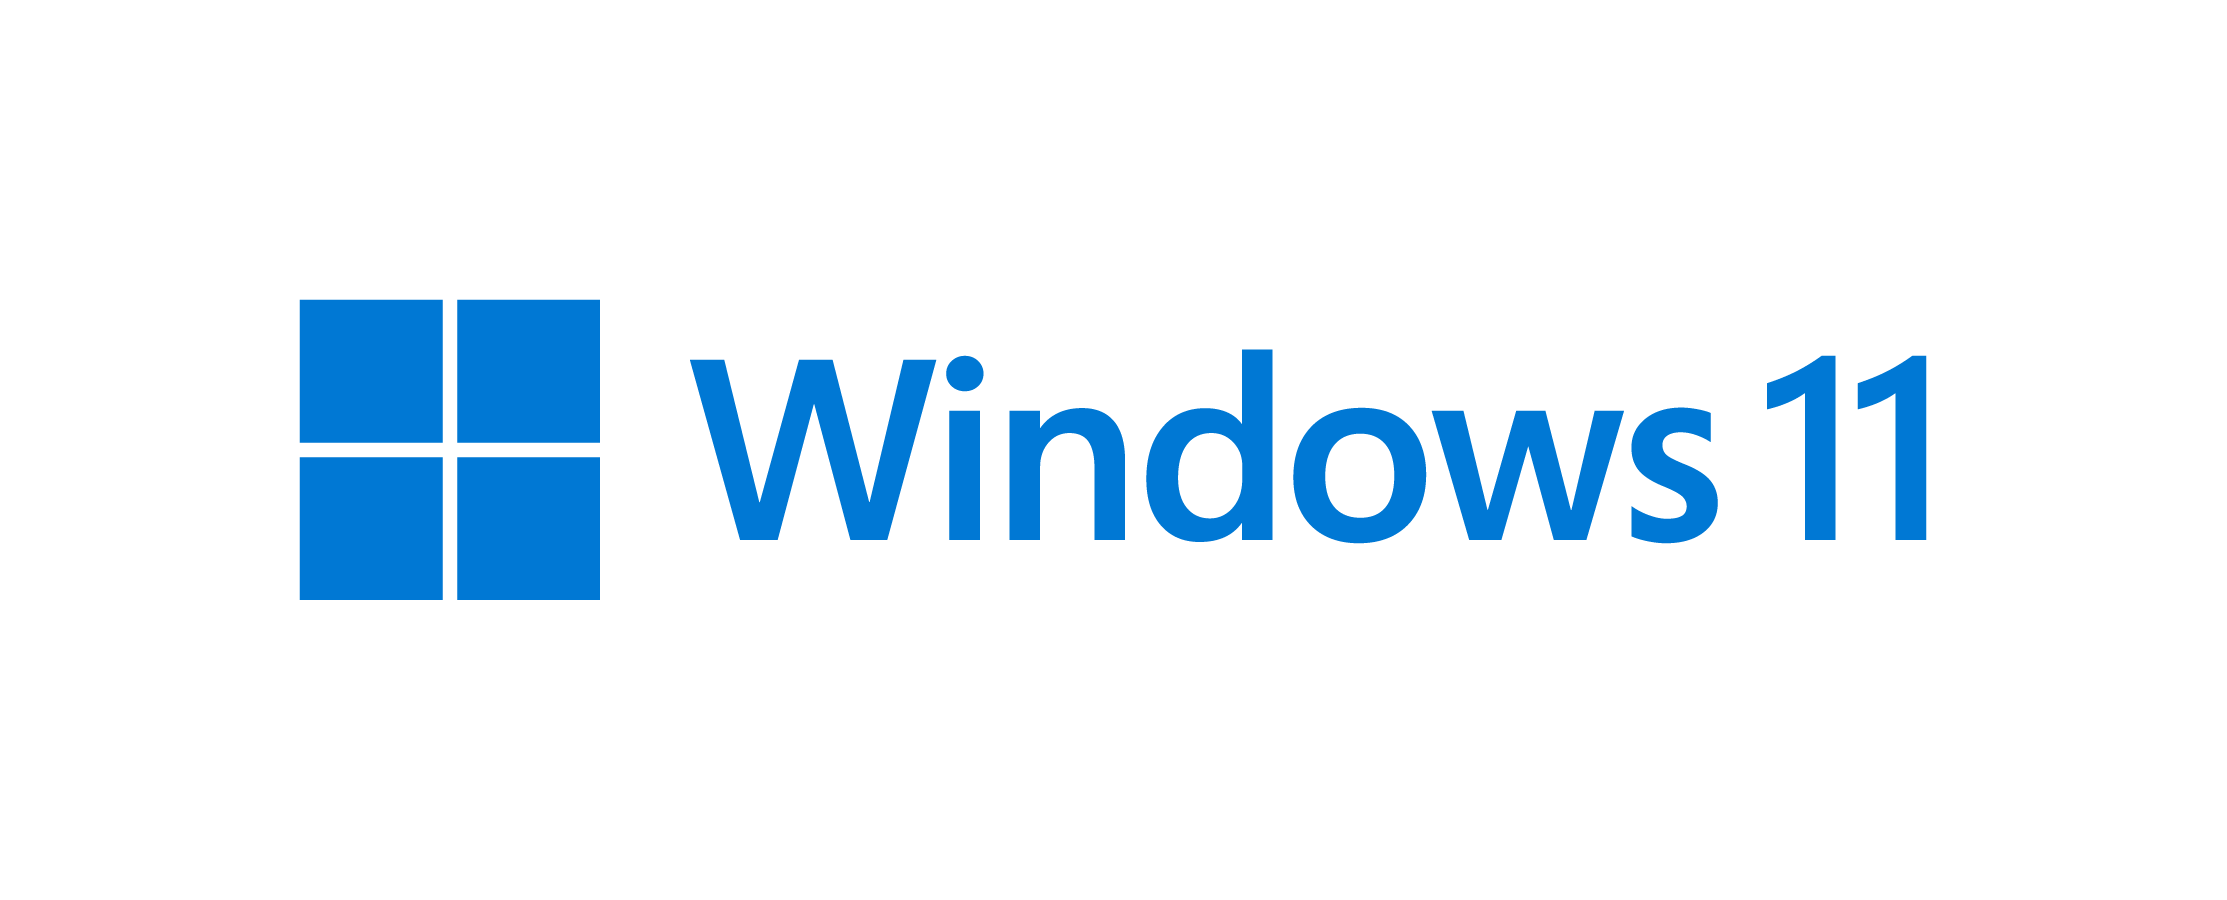 Windows 11 support end date